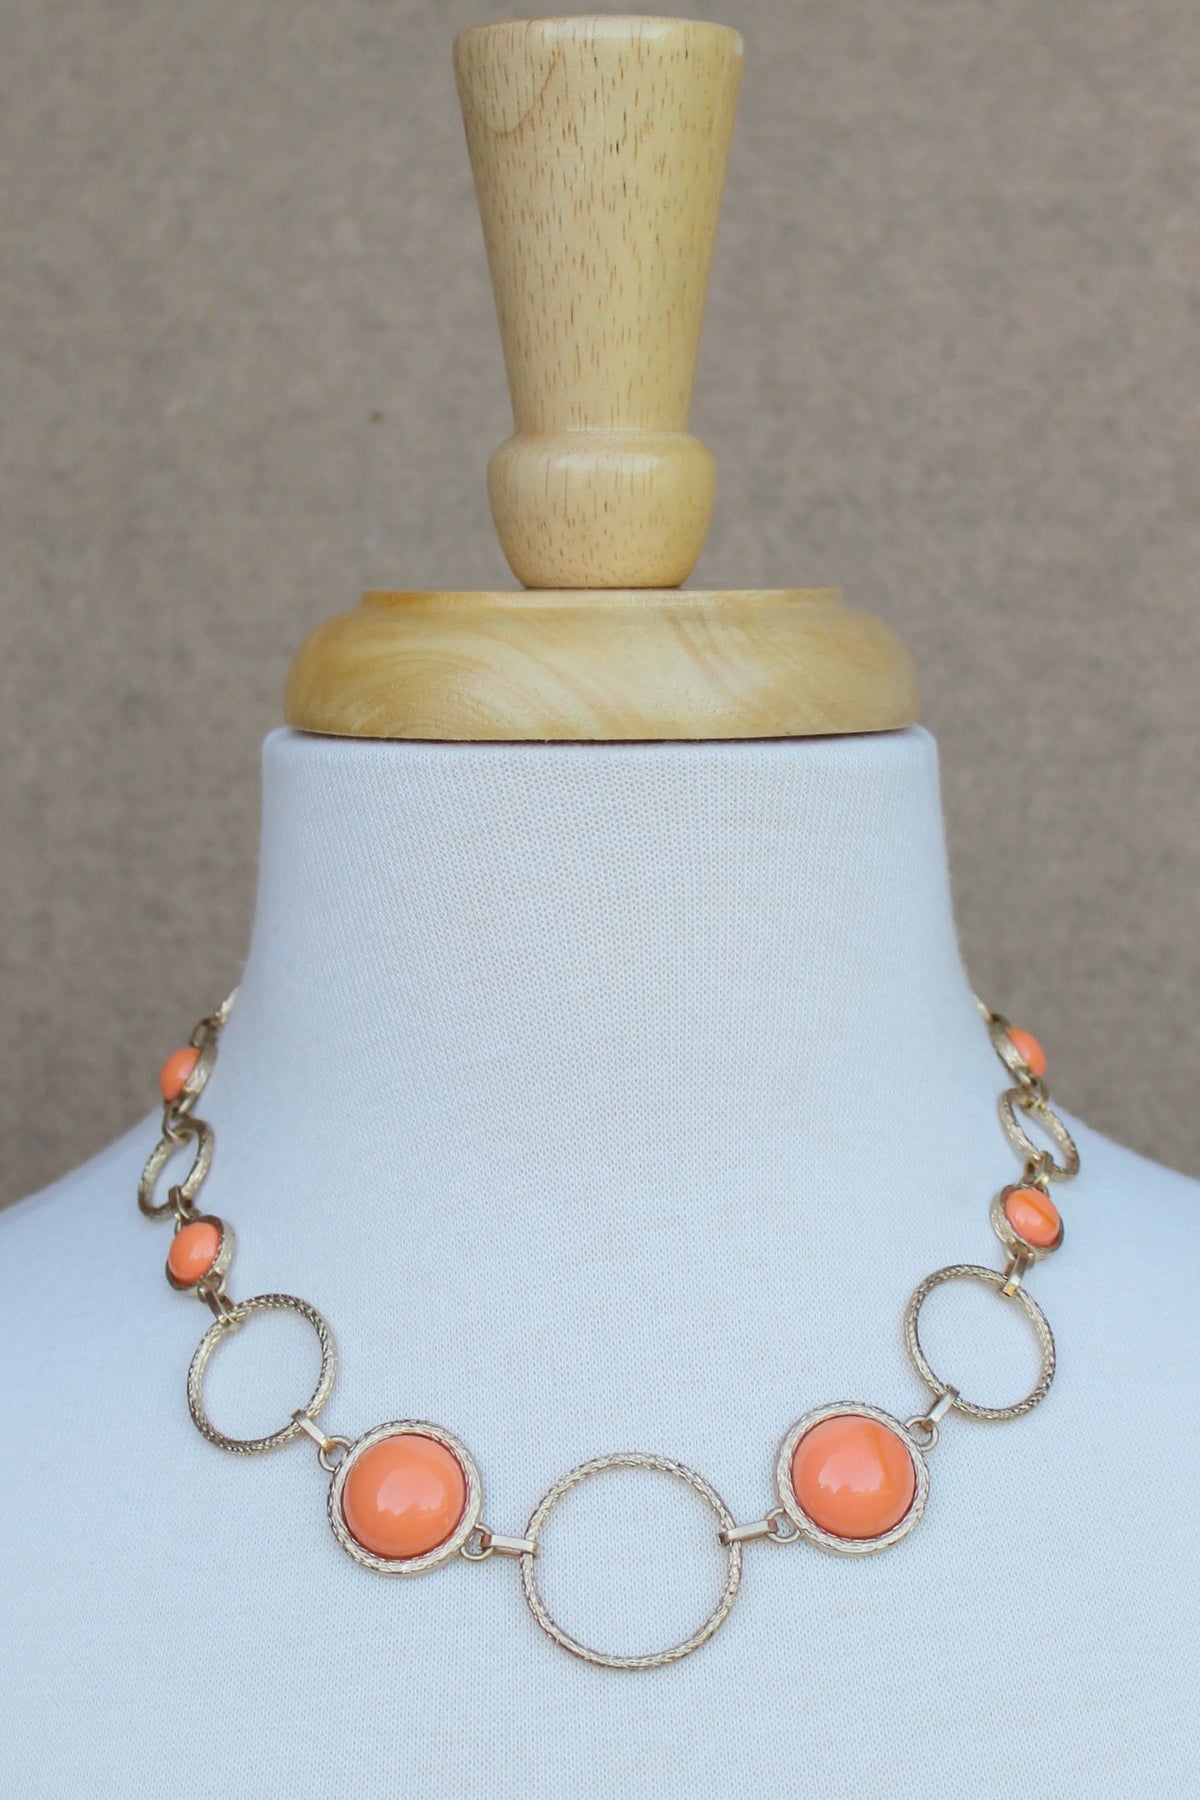 Rings and Beads Necklace, Melon